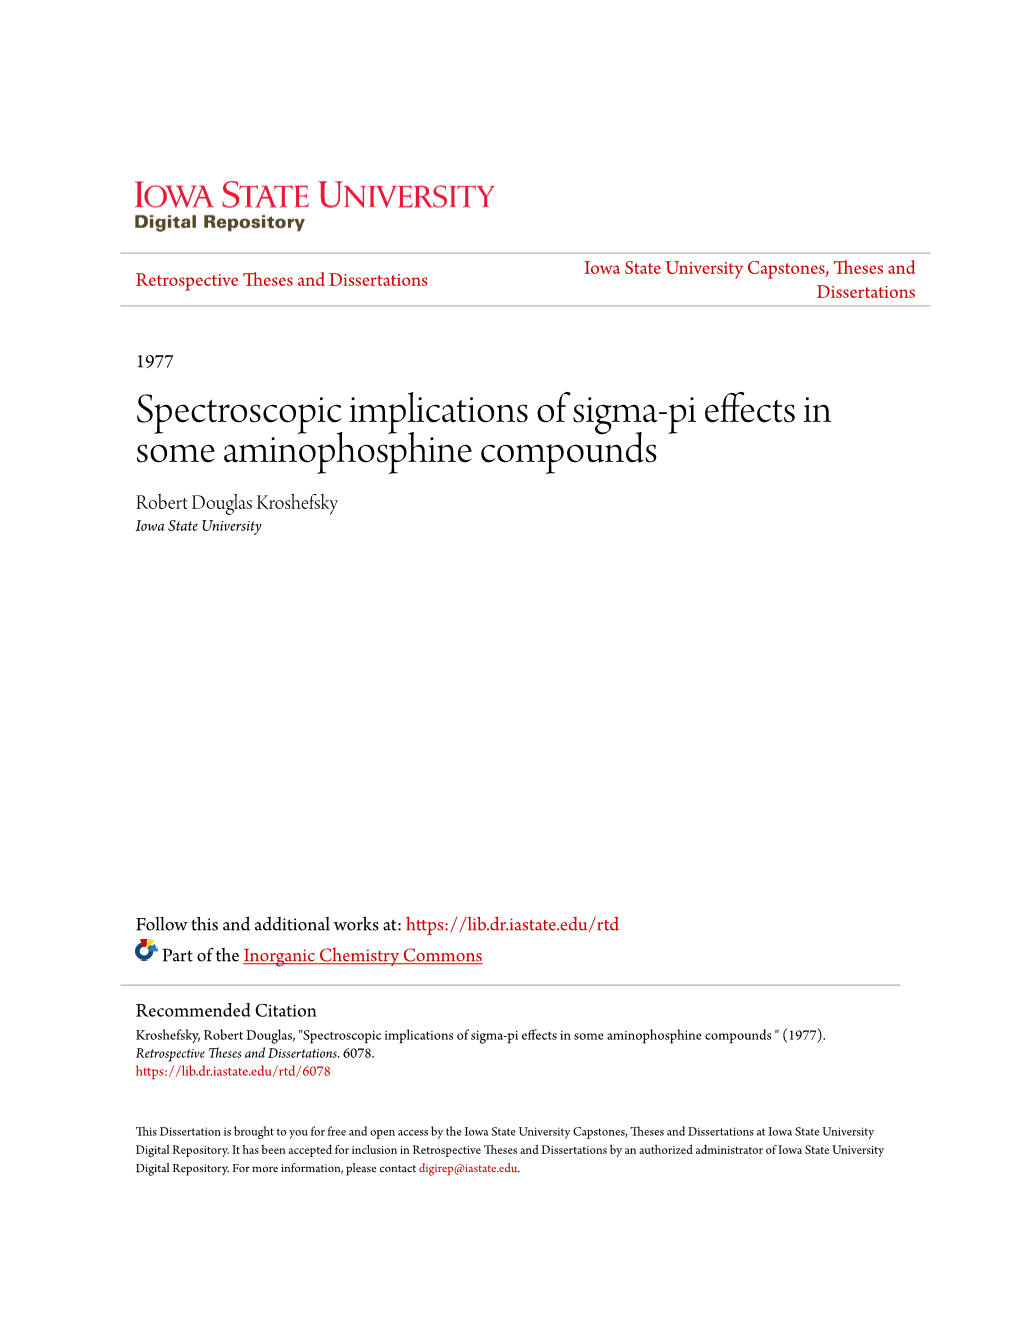 Spectroscopic Implications of Sigma-Pi Effects in Some Aminophosphine Compounds Robert Douglas Kroshefsky Iowa State University